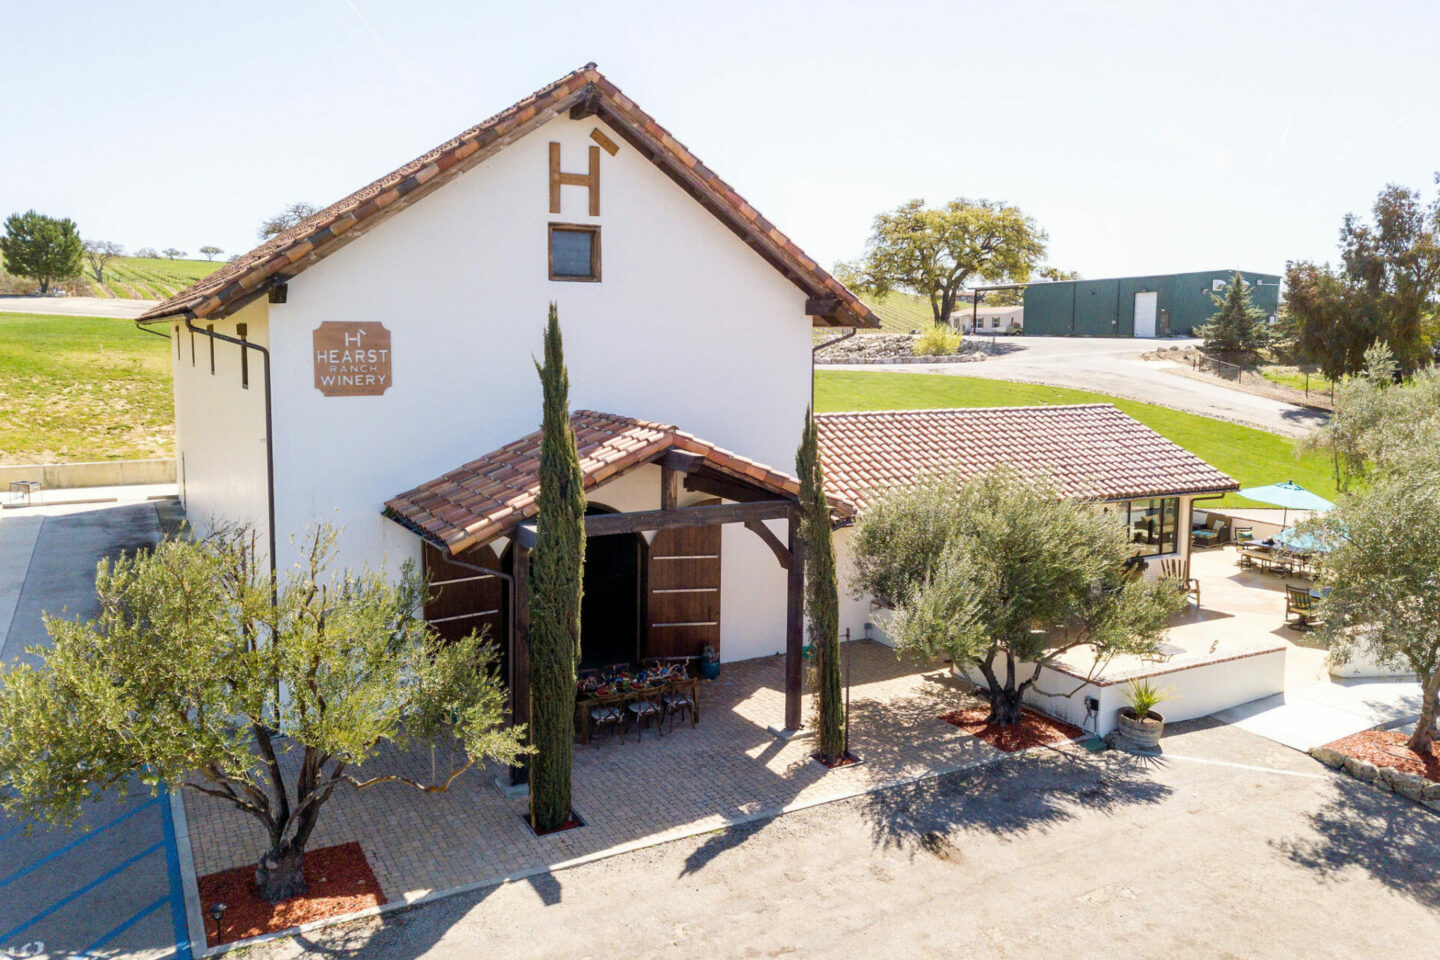 Exterior of Hearst Ranch Winery